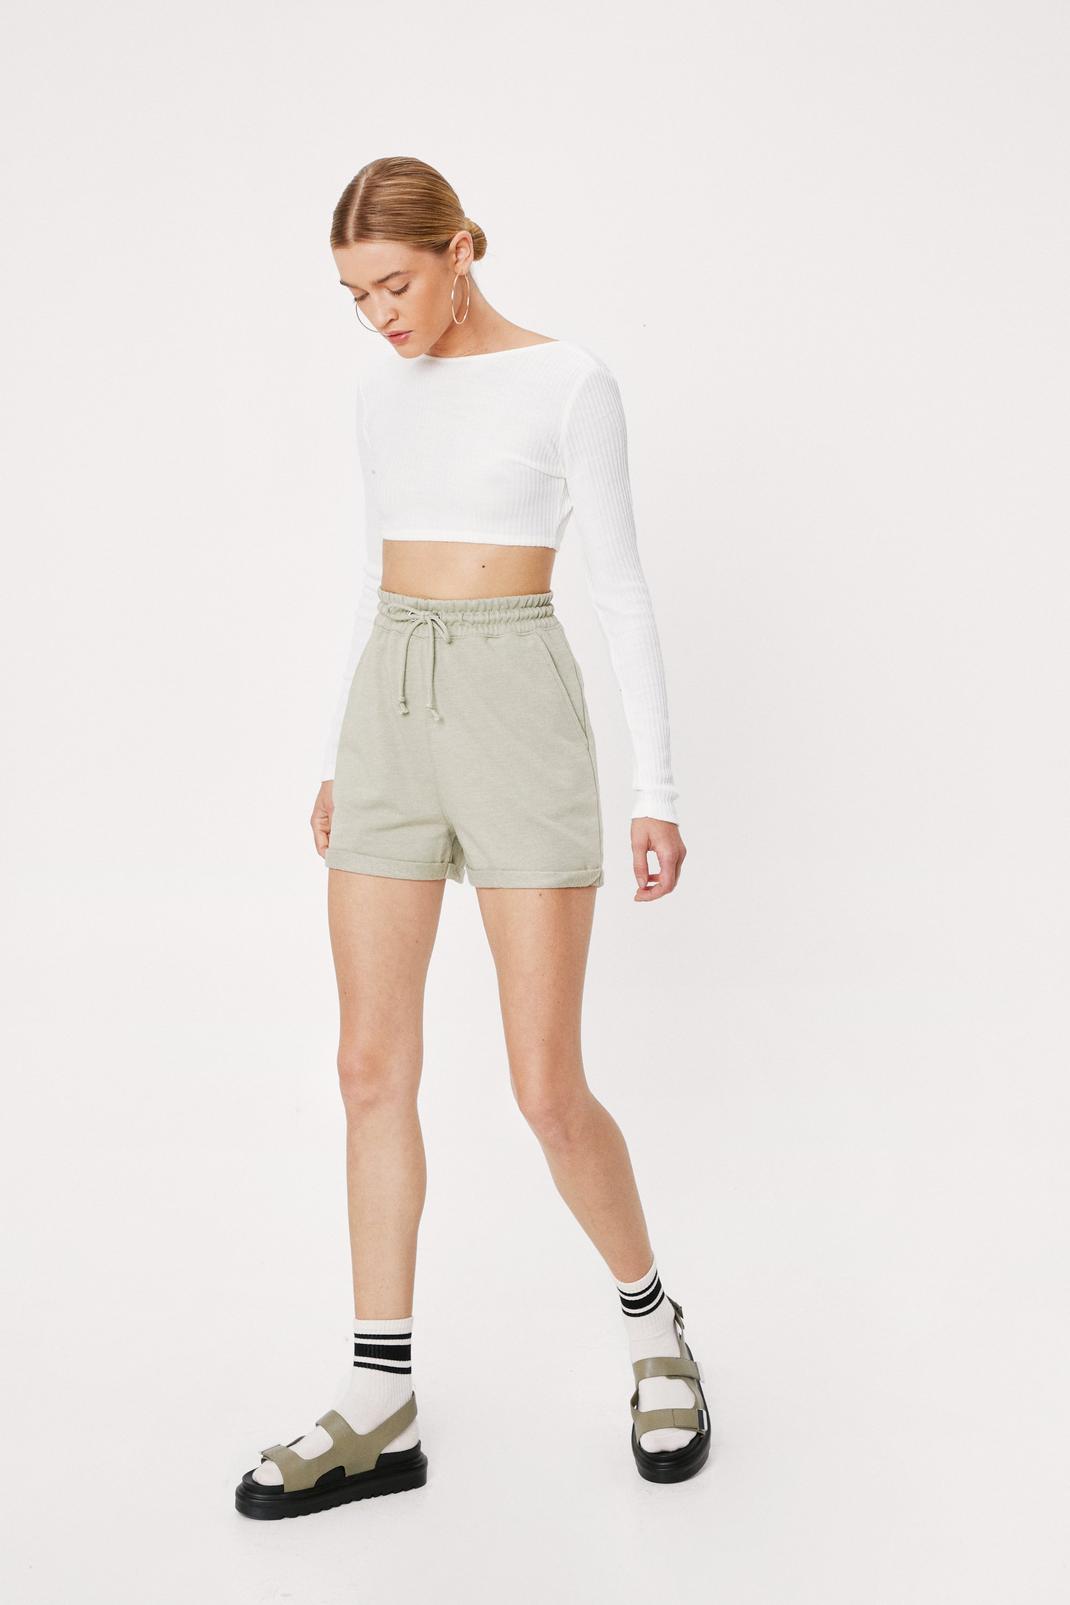 White high waisted shorts Show it off